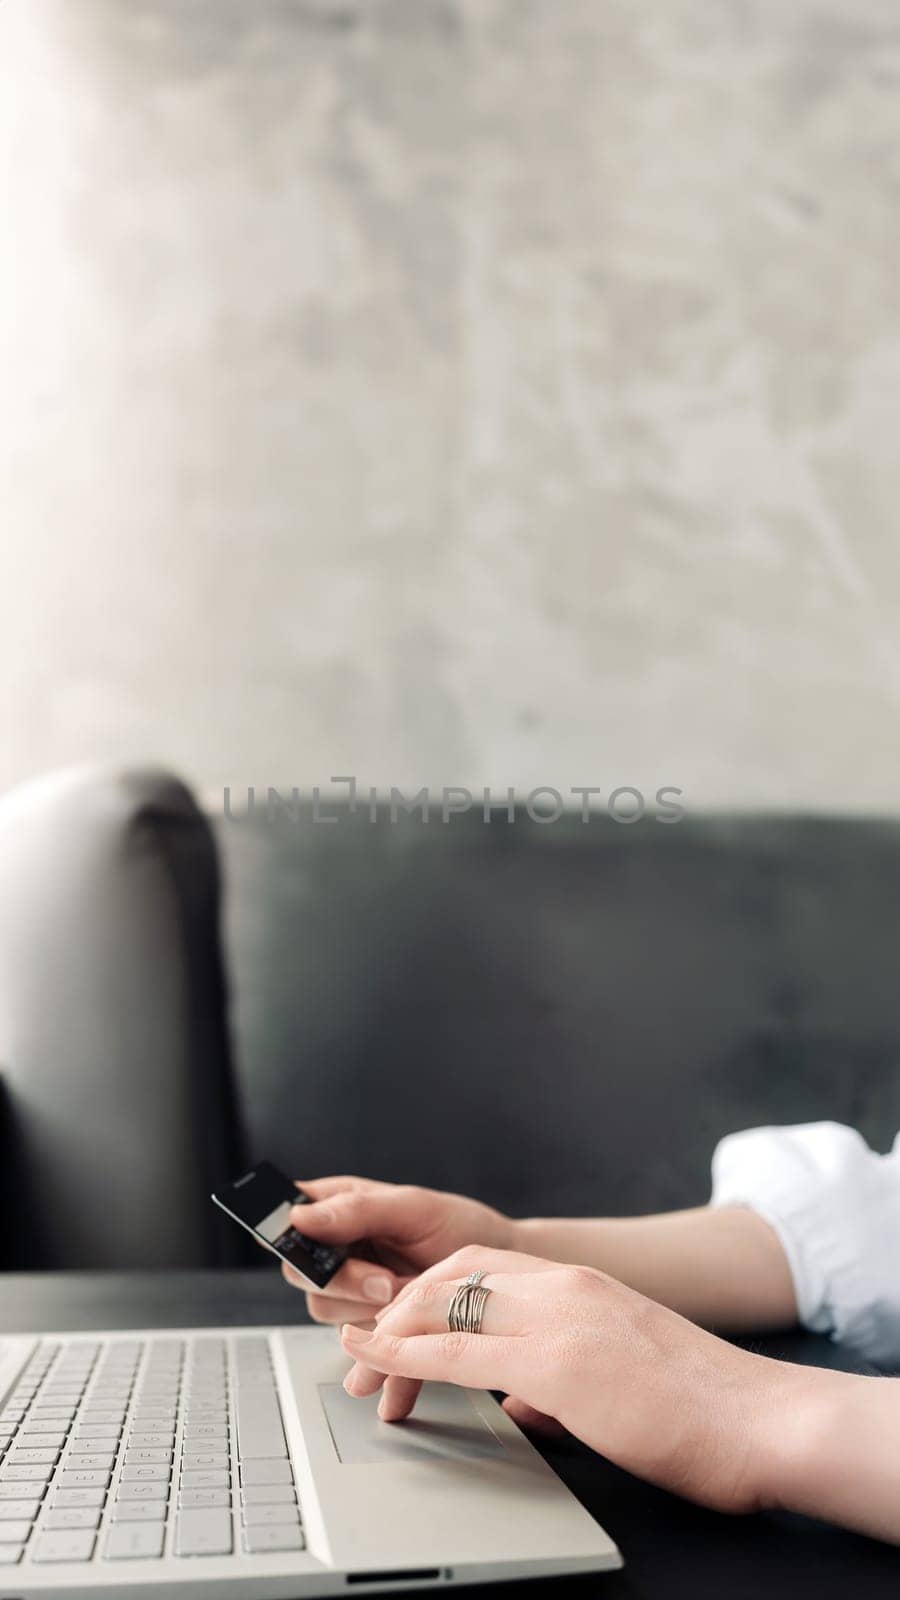 Elegant Online Shopping. Woman's Hands Gracefully Hold Credit Card, Making Purchases with Laptop - E-commerce Concept.